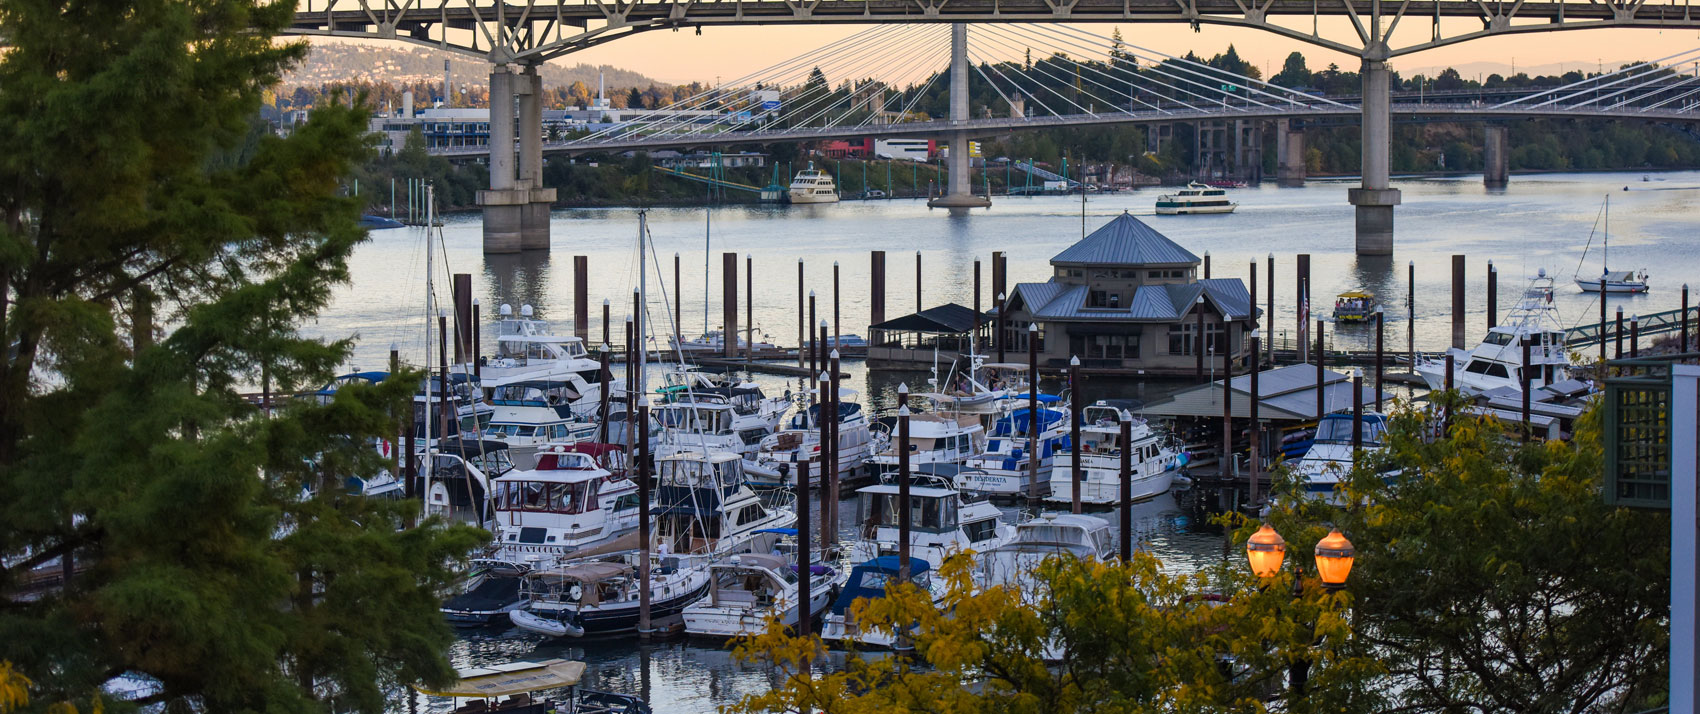 Riverplace boats on the portland waterfront